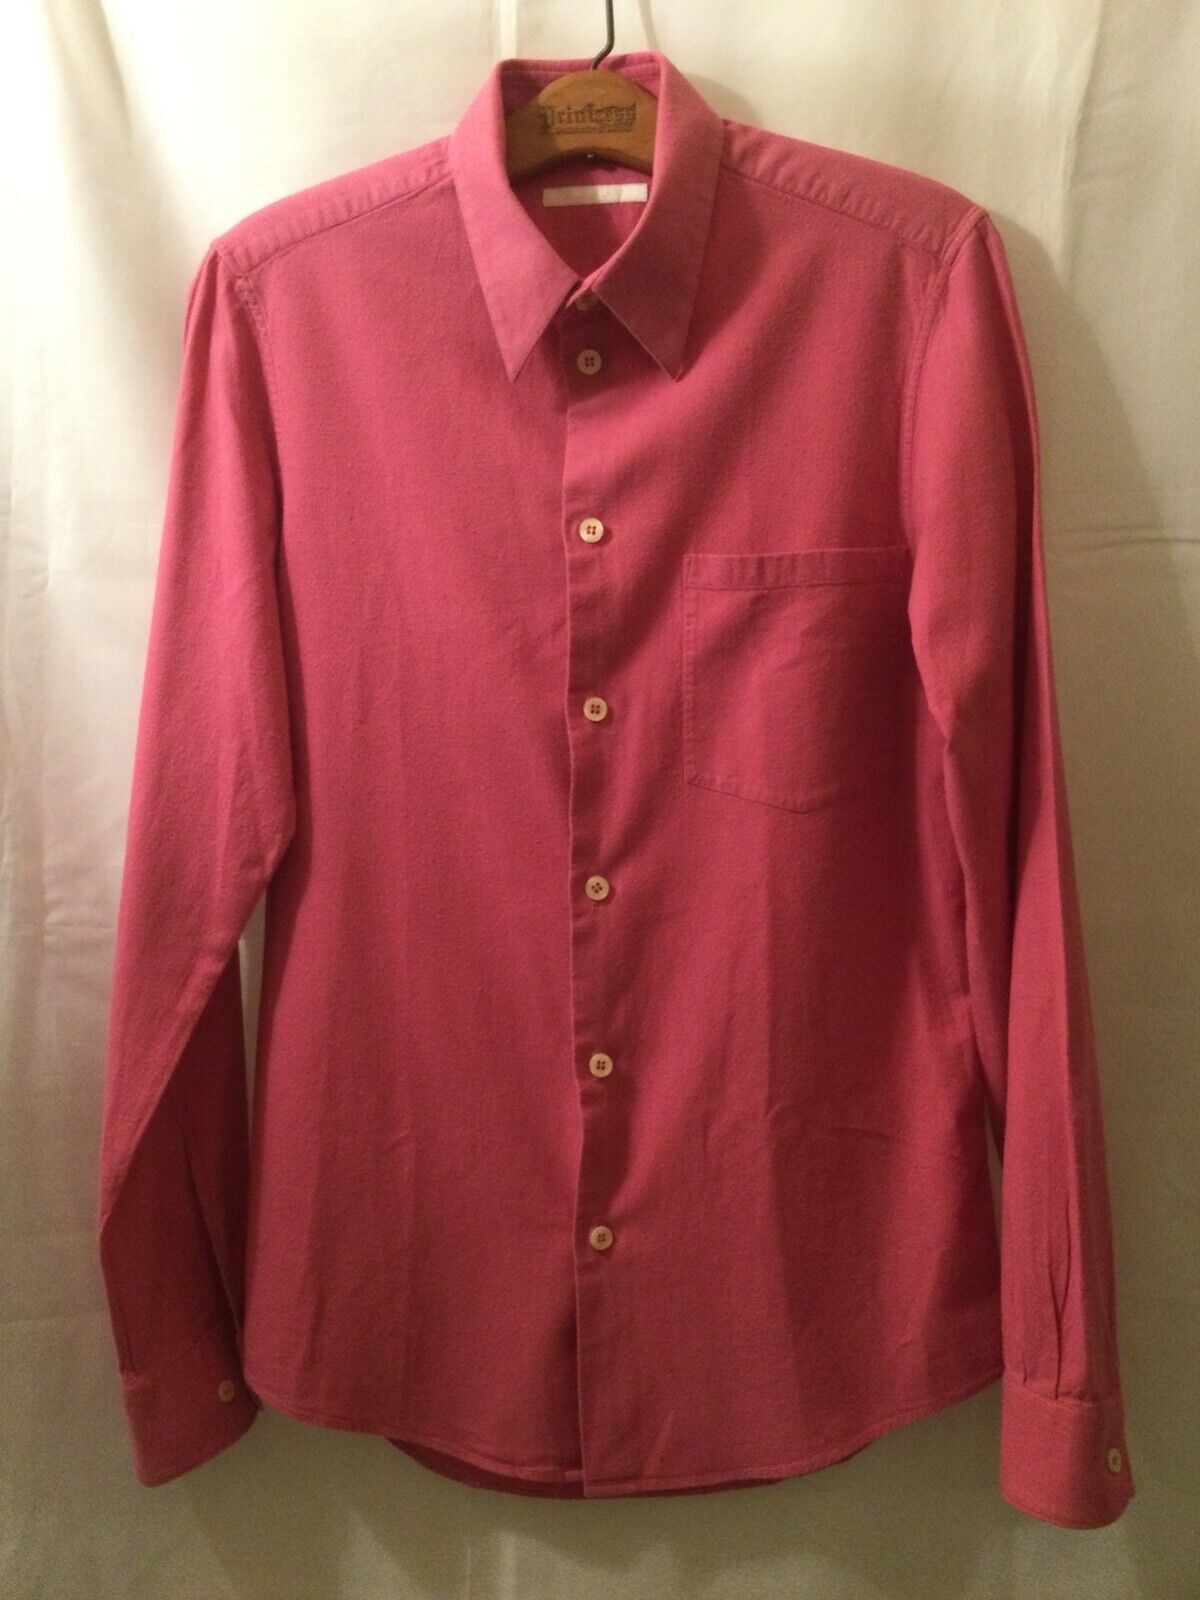 Helmut Lang Early 2000's Pink Brushed Cotton Classic Shirt Size US S / EU 44-46 / 1 - 1 Preview